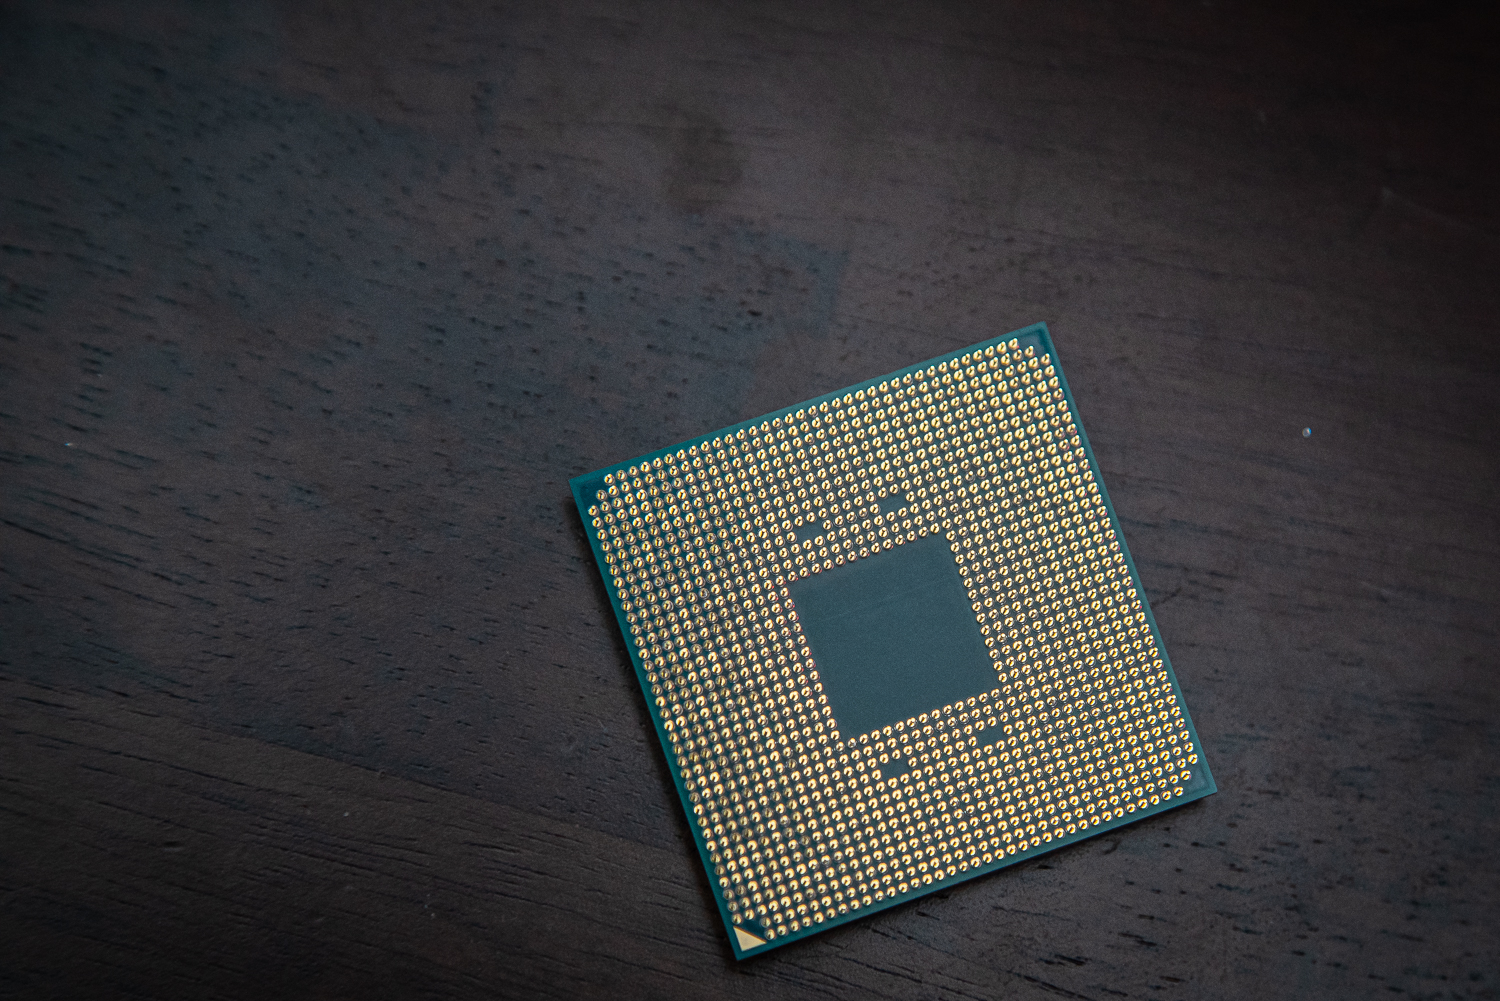 AMD Ryzen 7 5800X3D CPU Review: The King Of PC Gaming